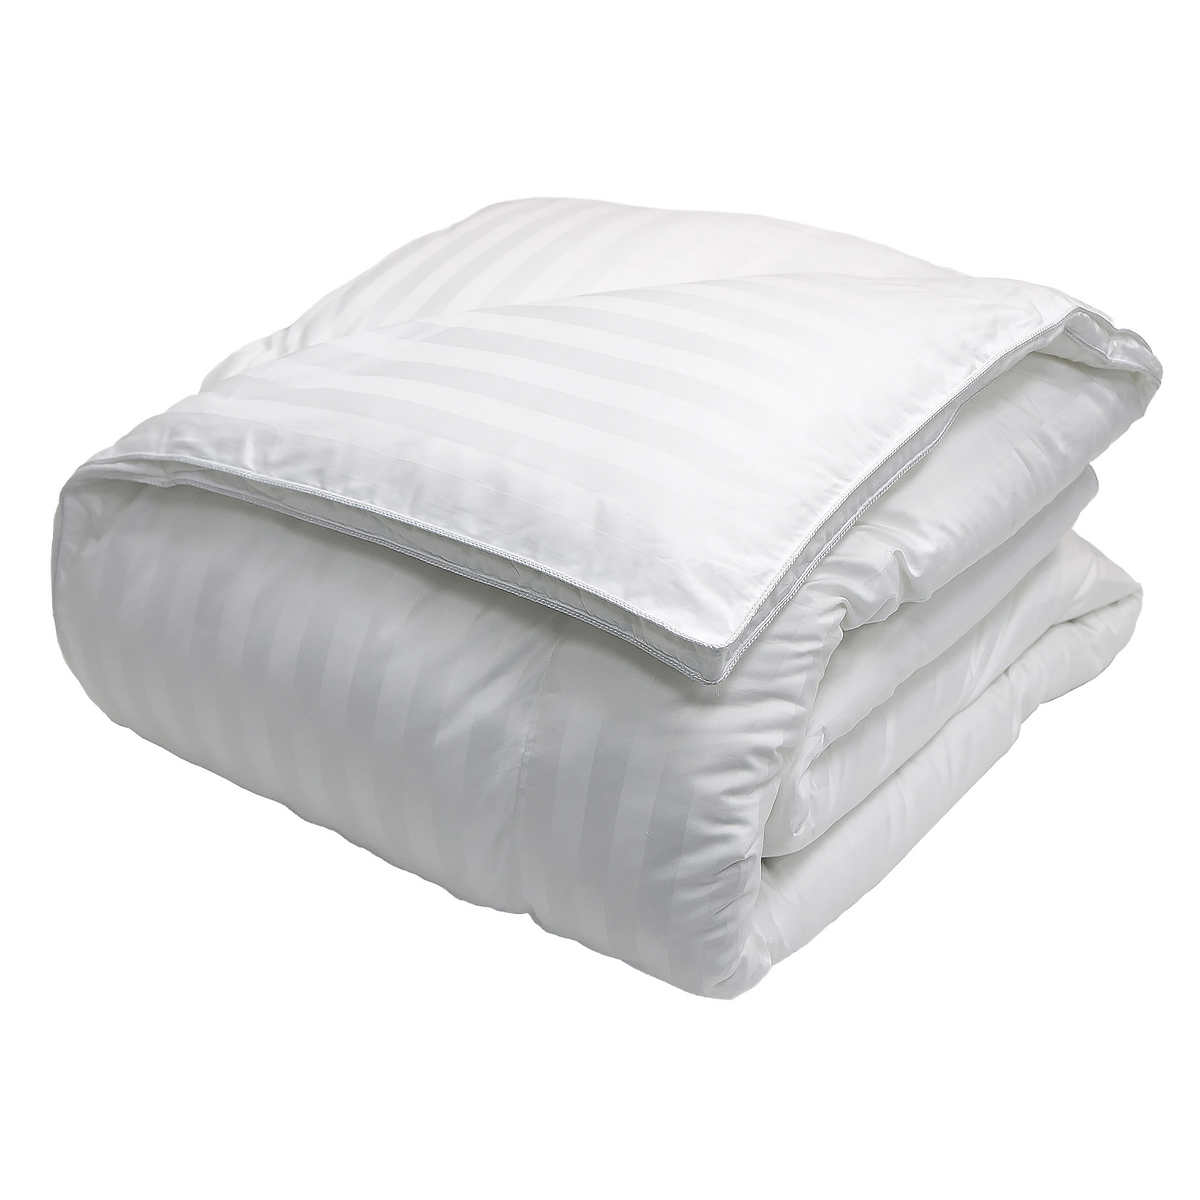 Details about   JBFF LivingQuarters Oasis Down Alternative Twill Comforter Comforter Full/Queen 